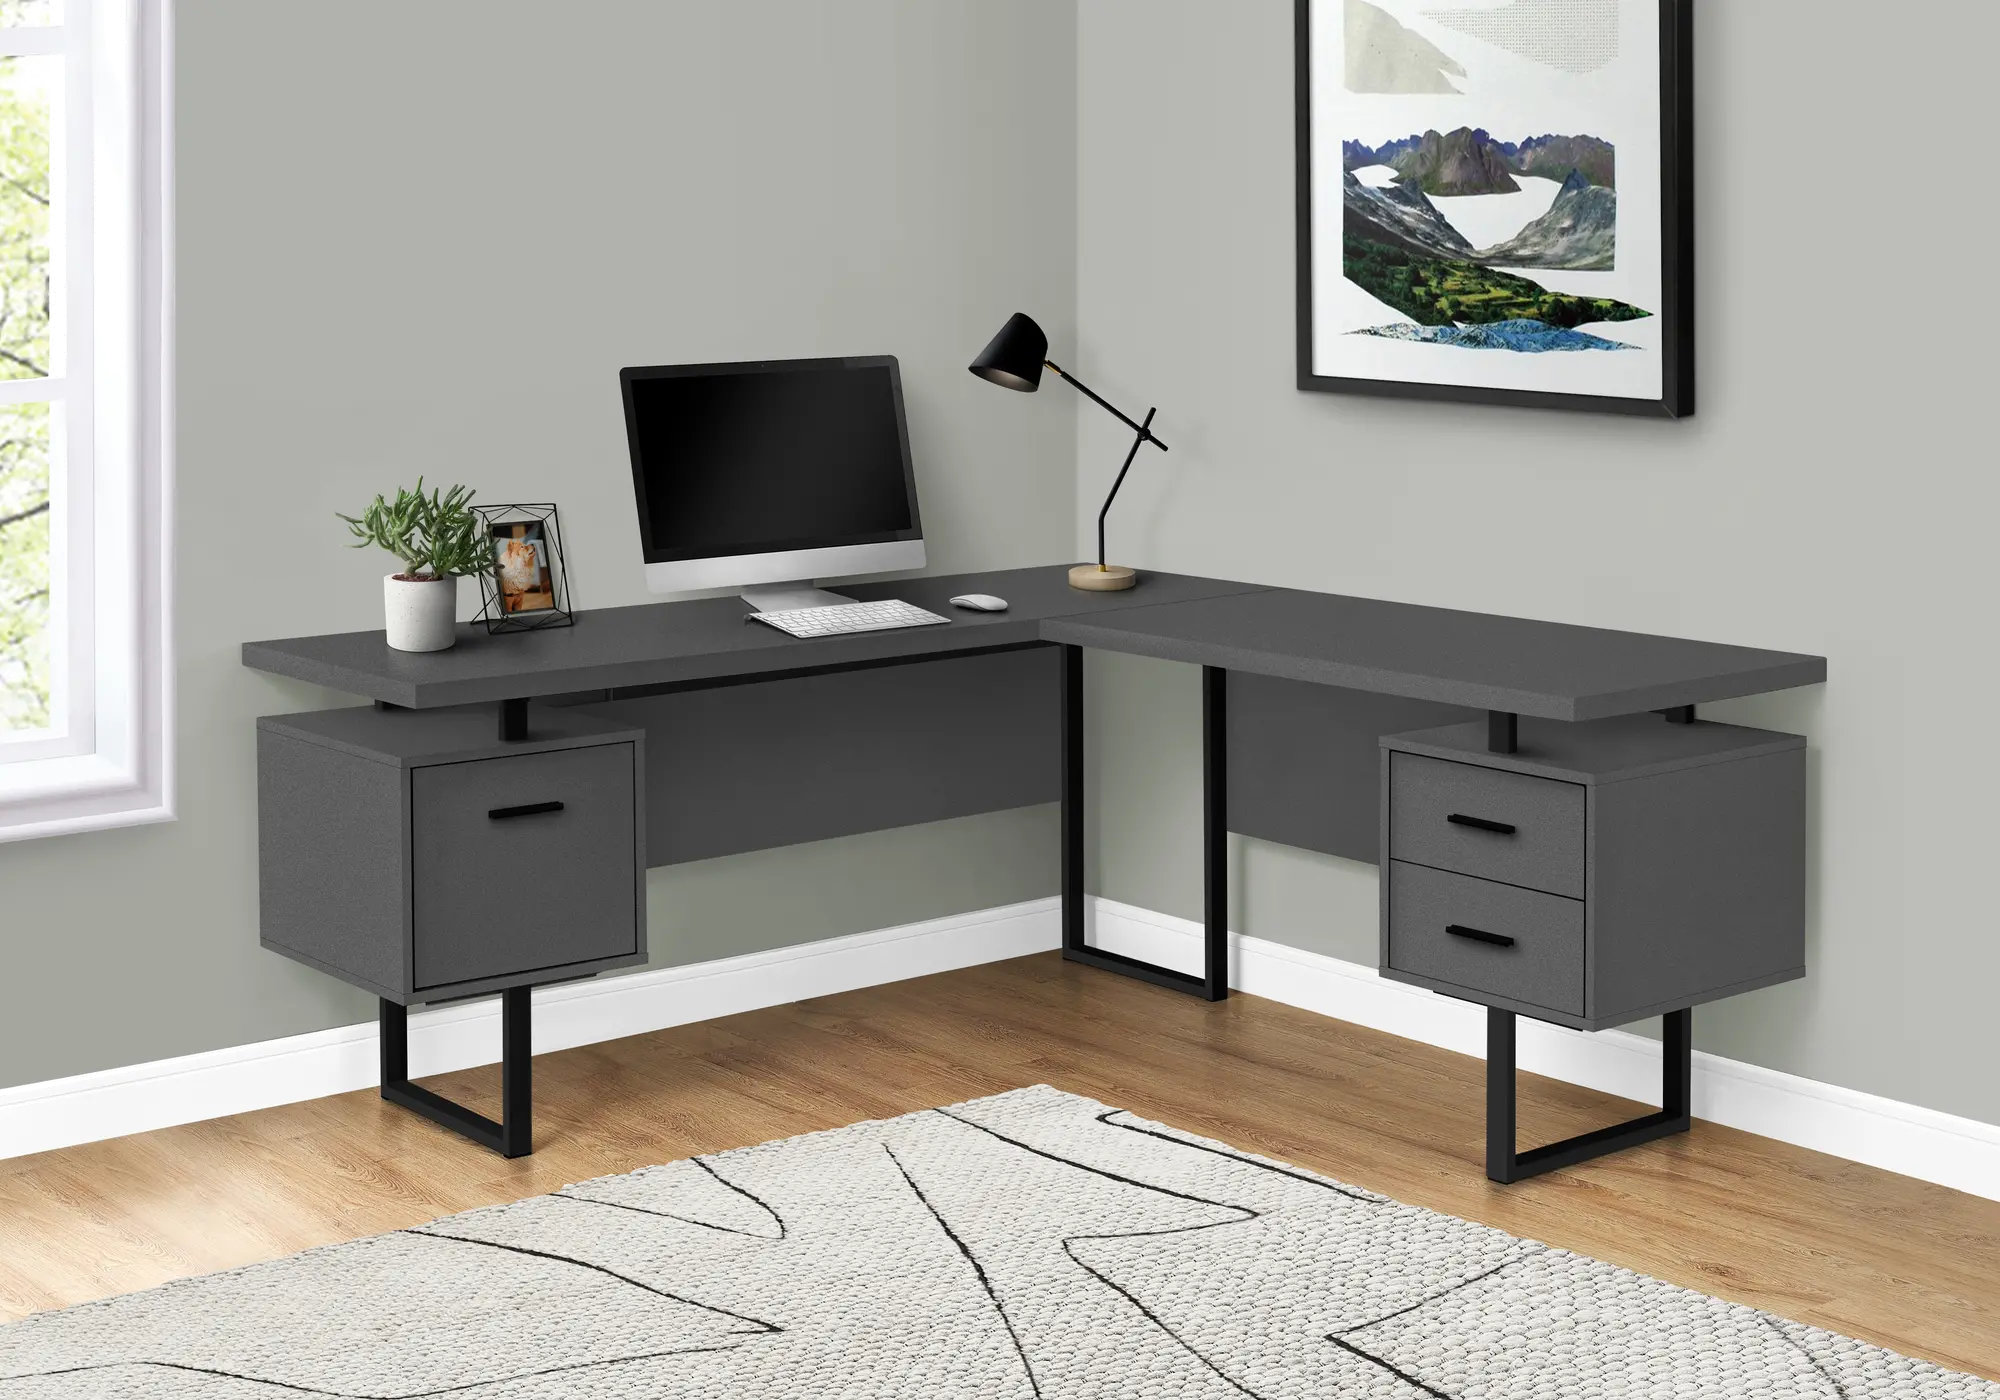 Gray and Black L-Shaped Desk